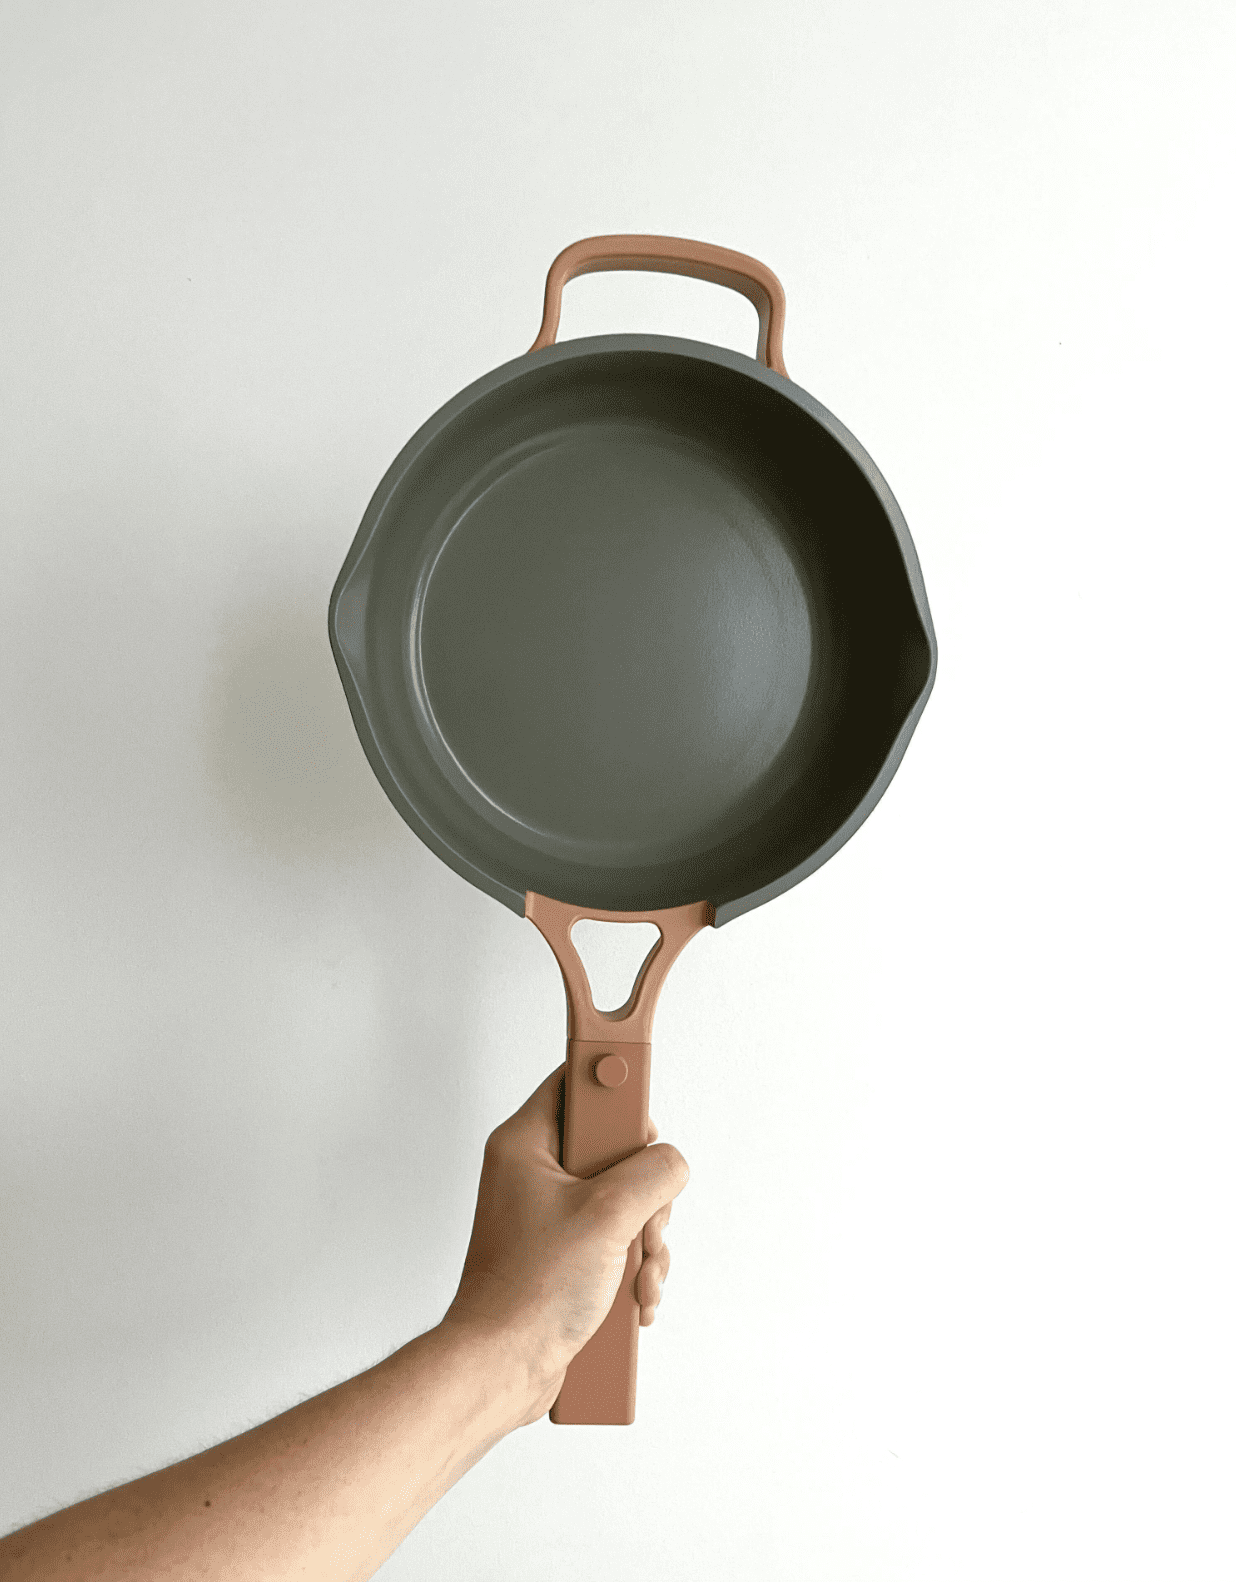 Our Place Mini Always Pan Review 2022: This Trendy Pan Works